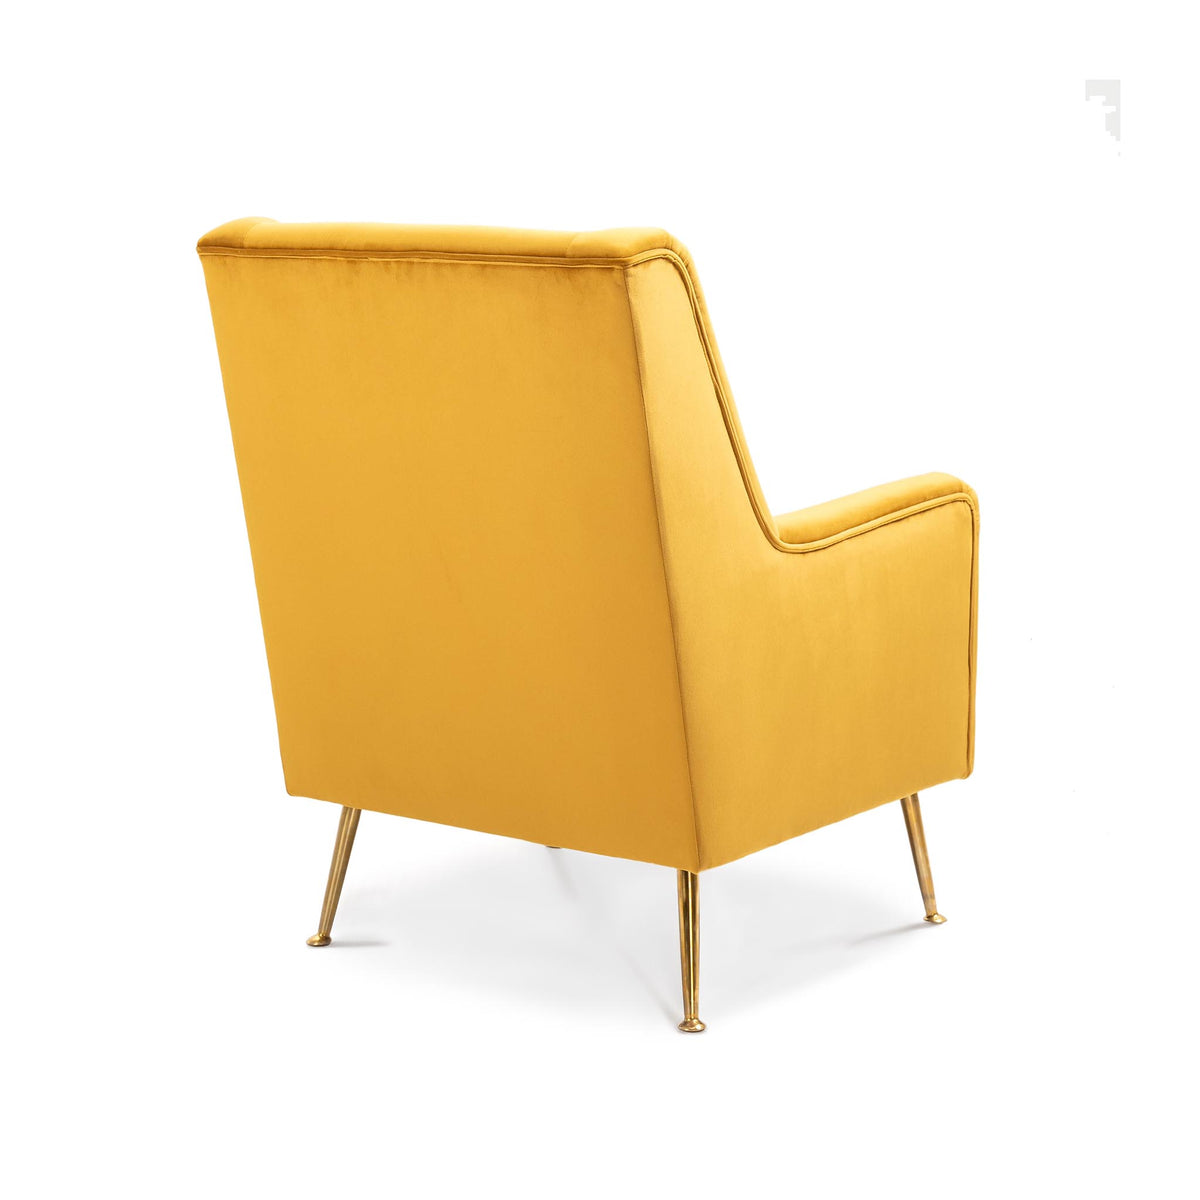 back view of the Mustard Yellow Velvet Wingback Armchair